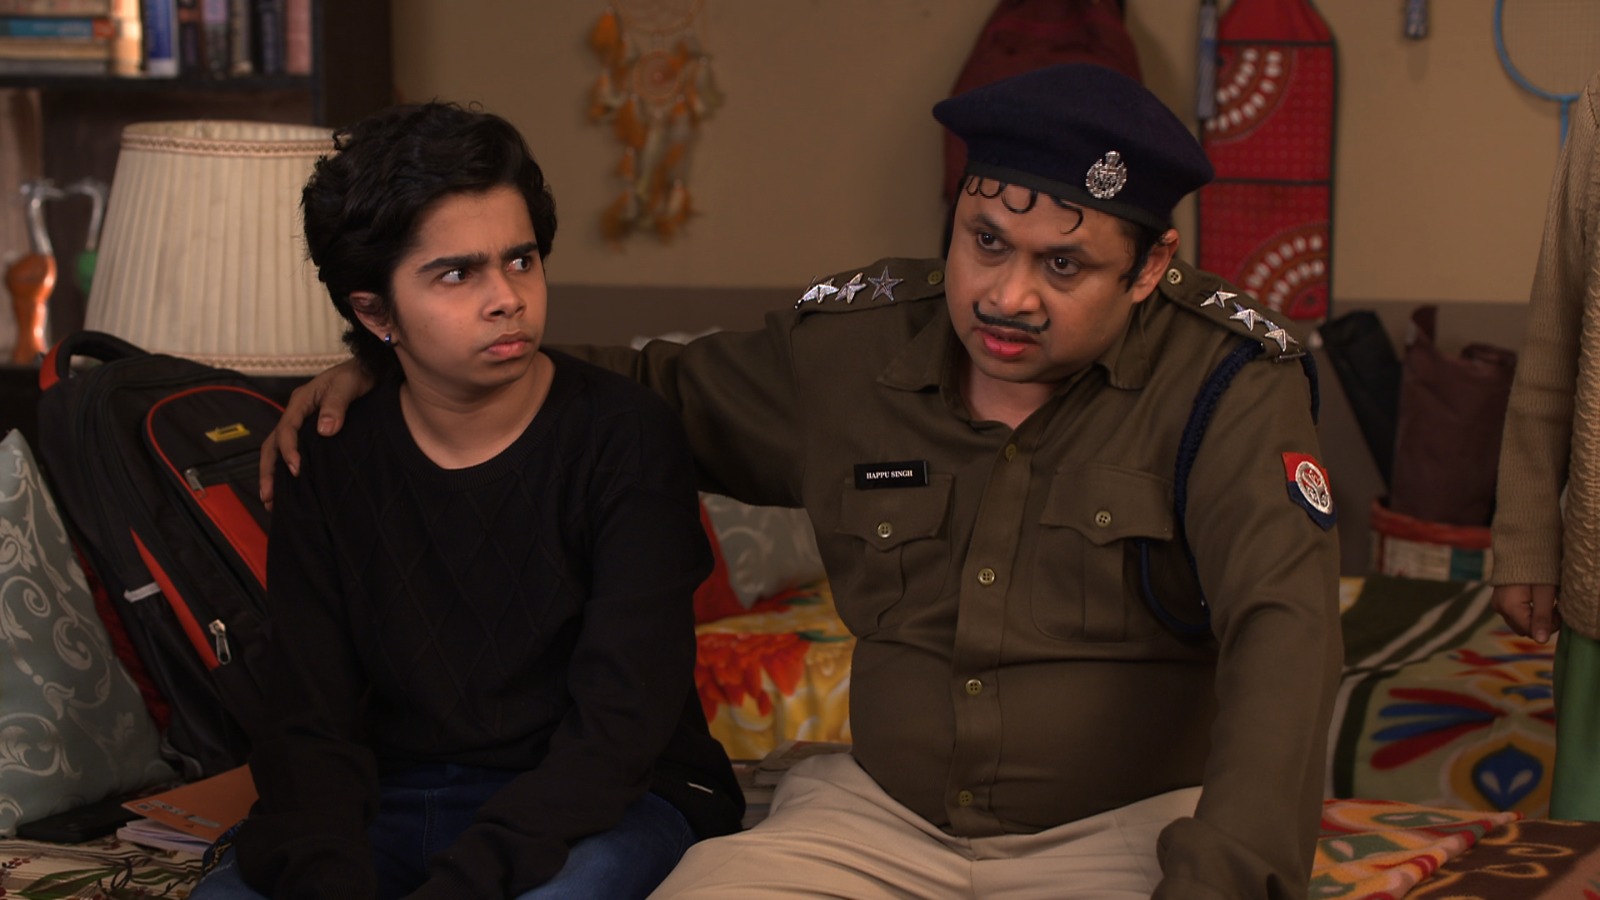 Haunted Hilarity Unleashed: &TV Happu and Bhabiji Ghar Par Hain Characters Face Ghostly Encounters!